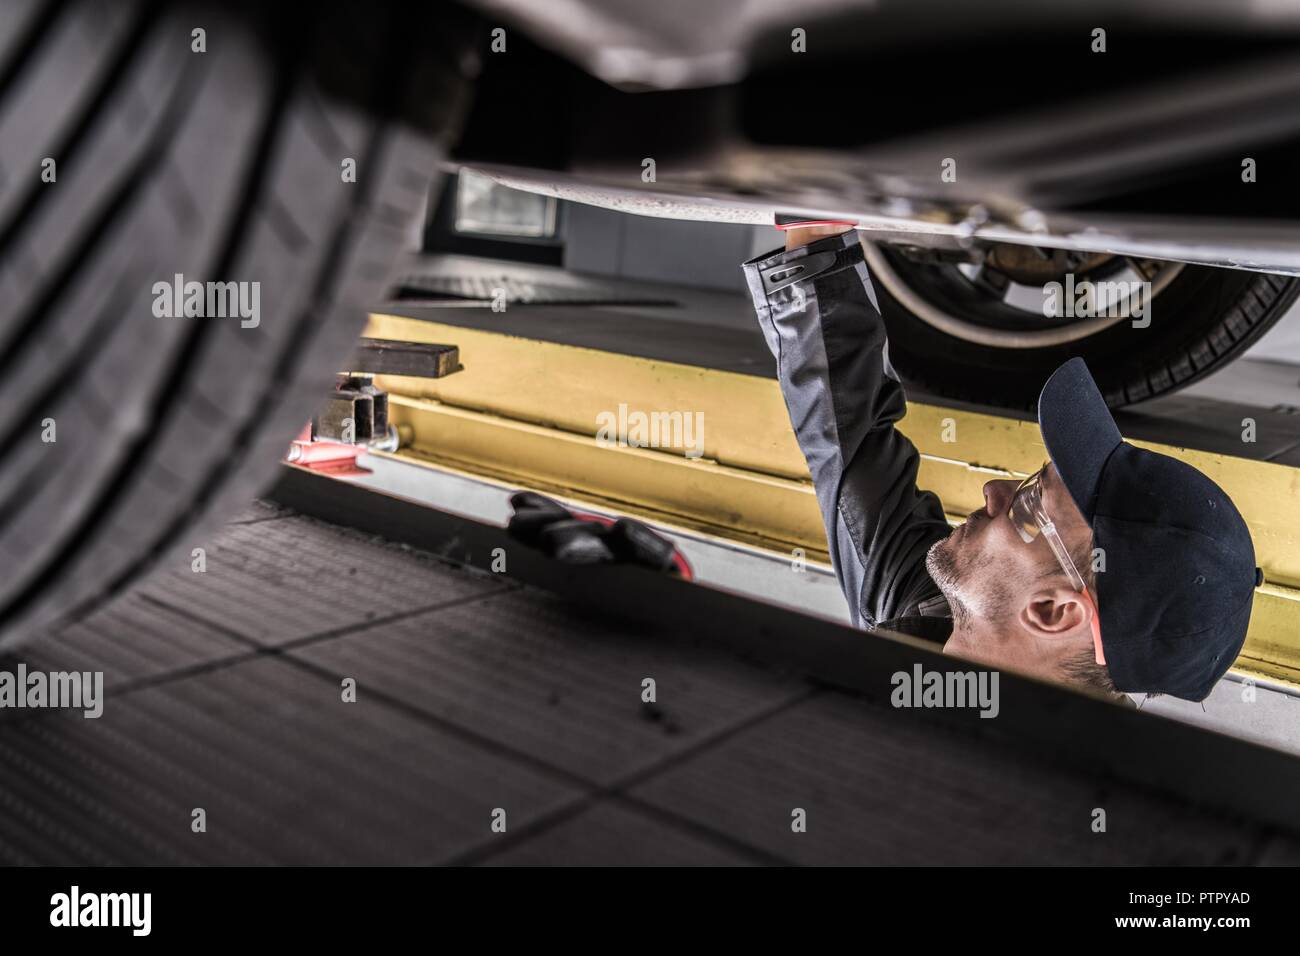 Mechanic Servicing Car. Checking Undercarriage Elements. Vehicle Maintenance. Stock Photo